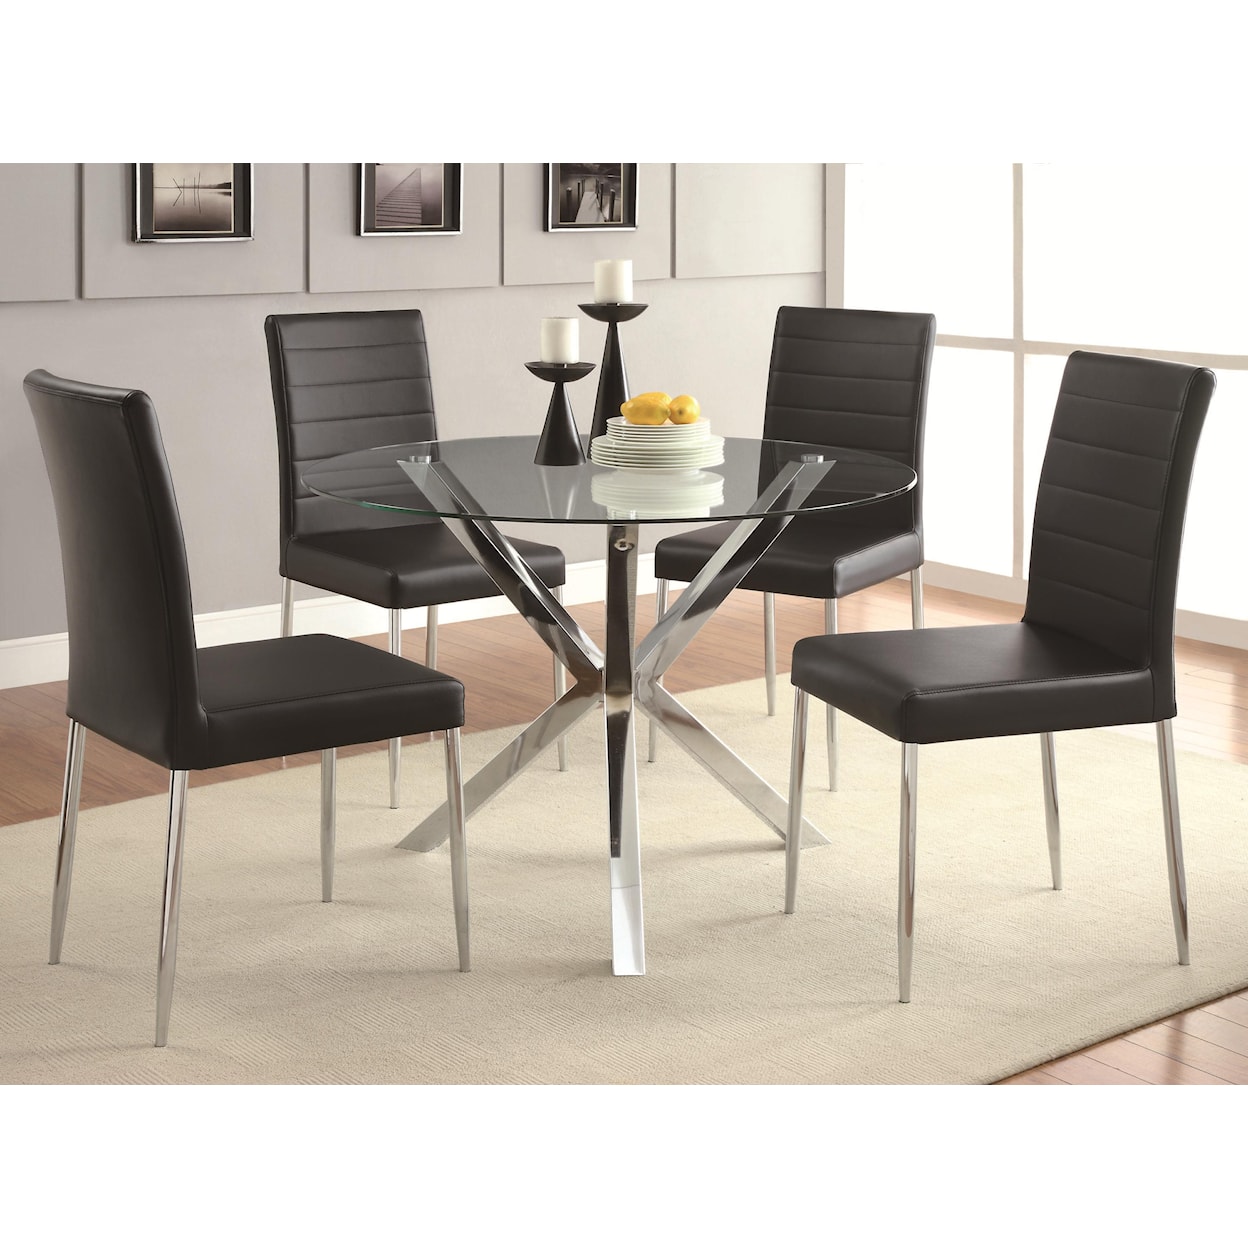 Coaster Vance Dining Table